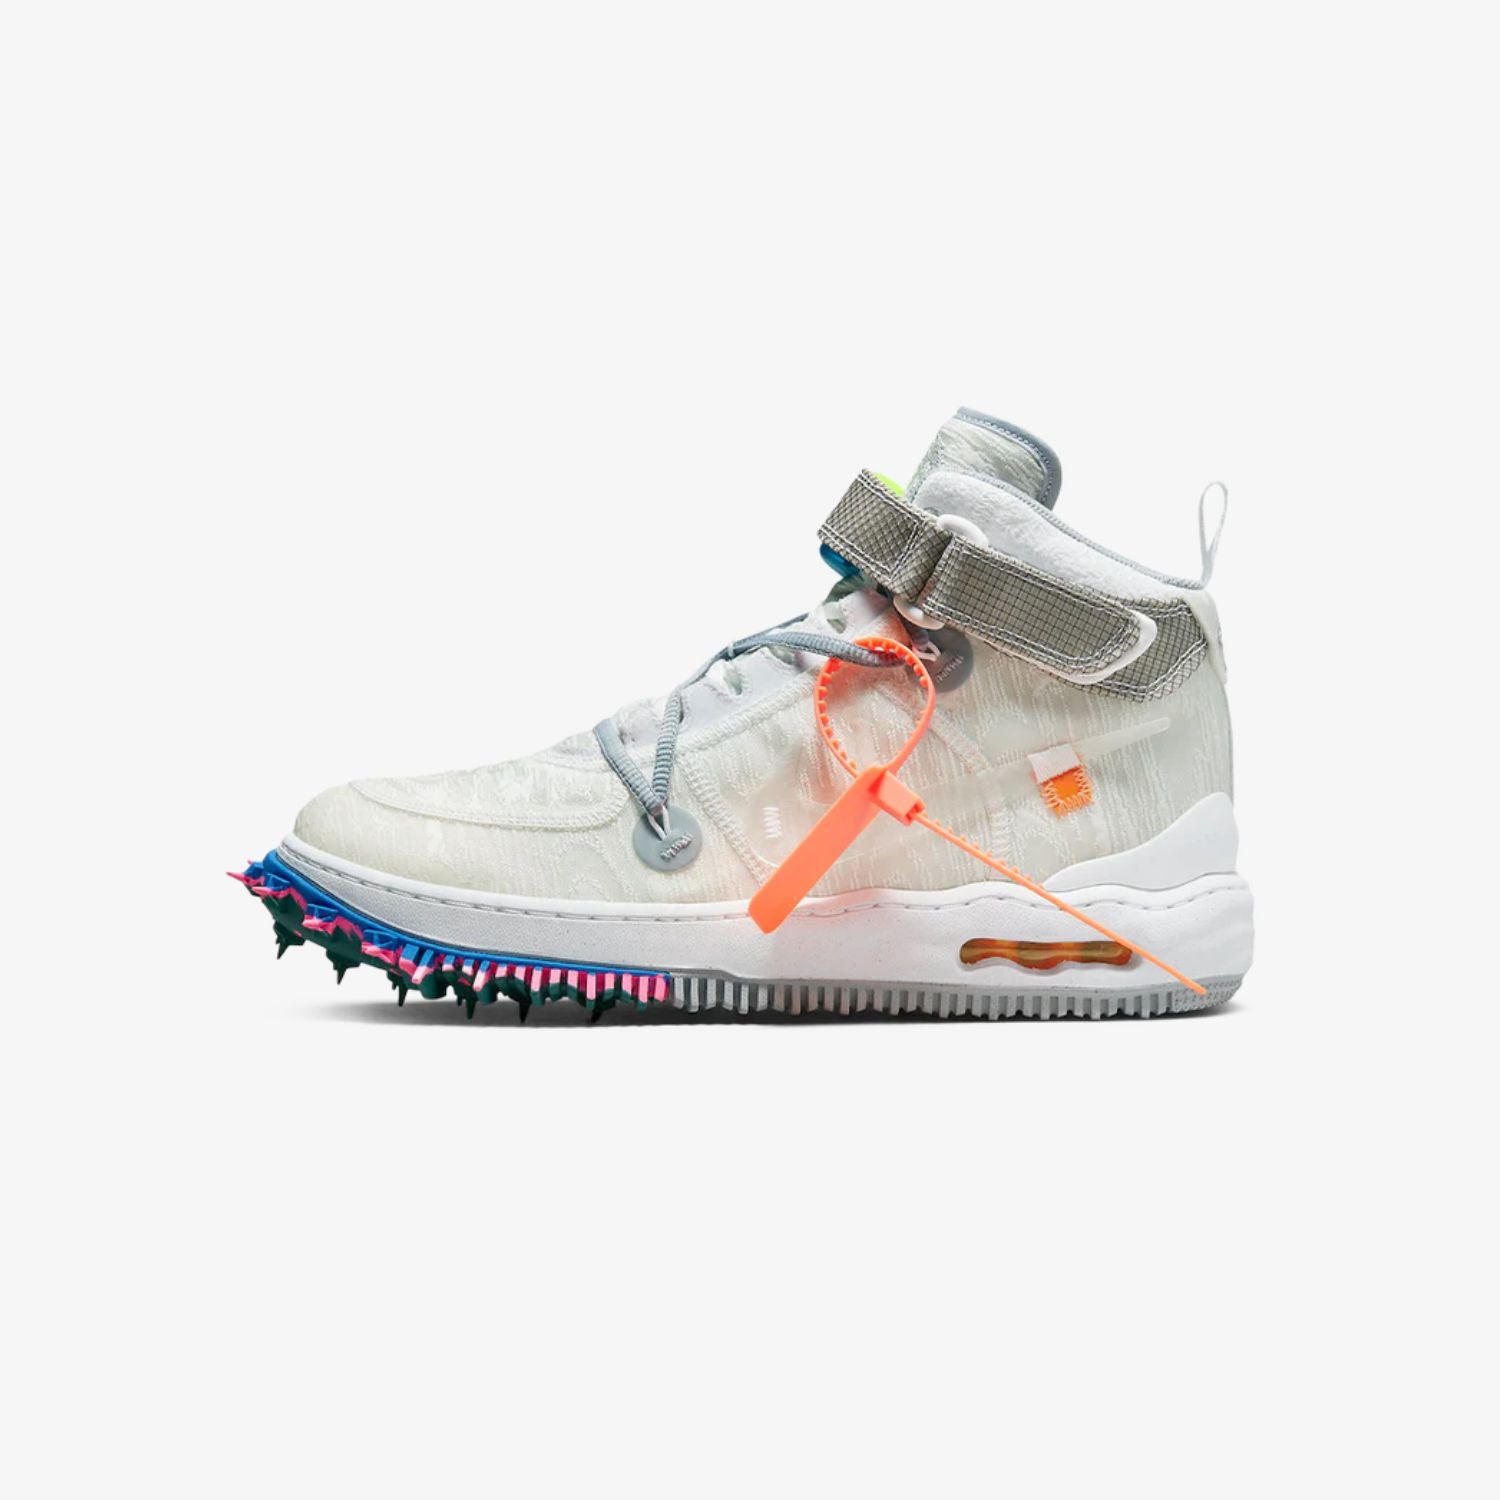 off-white-nike-air-force-1-mid-white-DO6290-100-unfazed-1